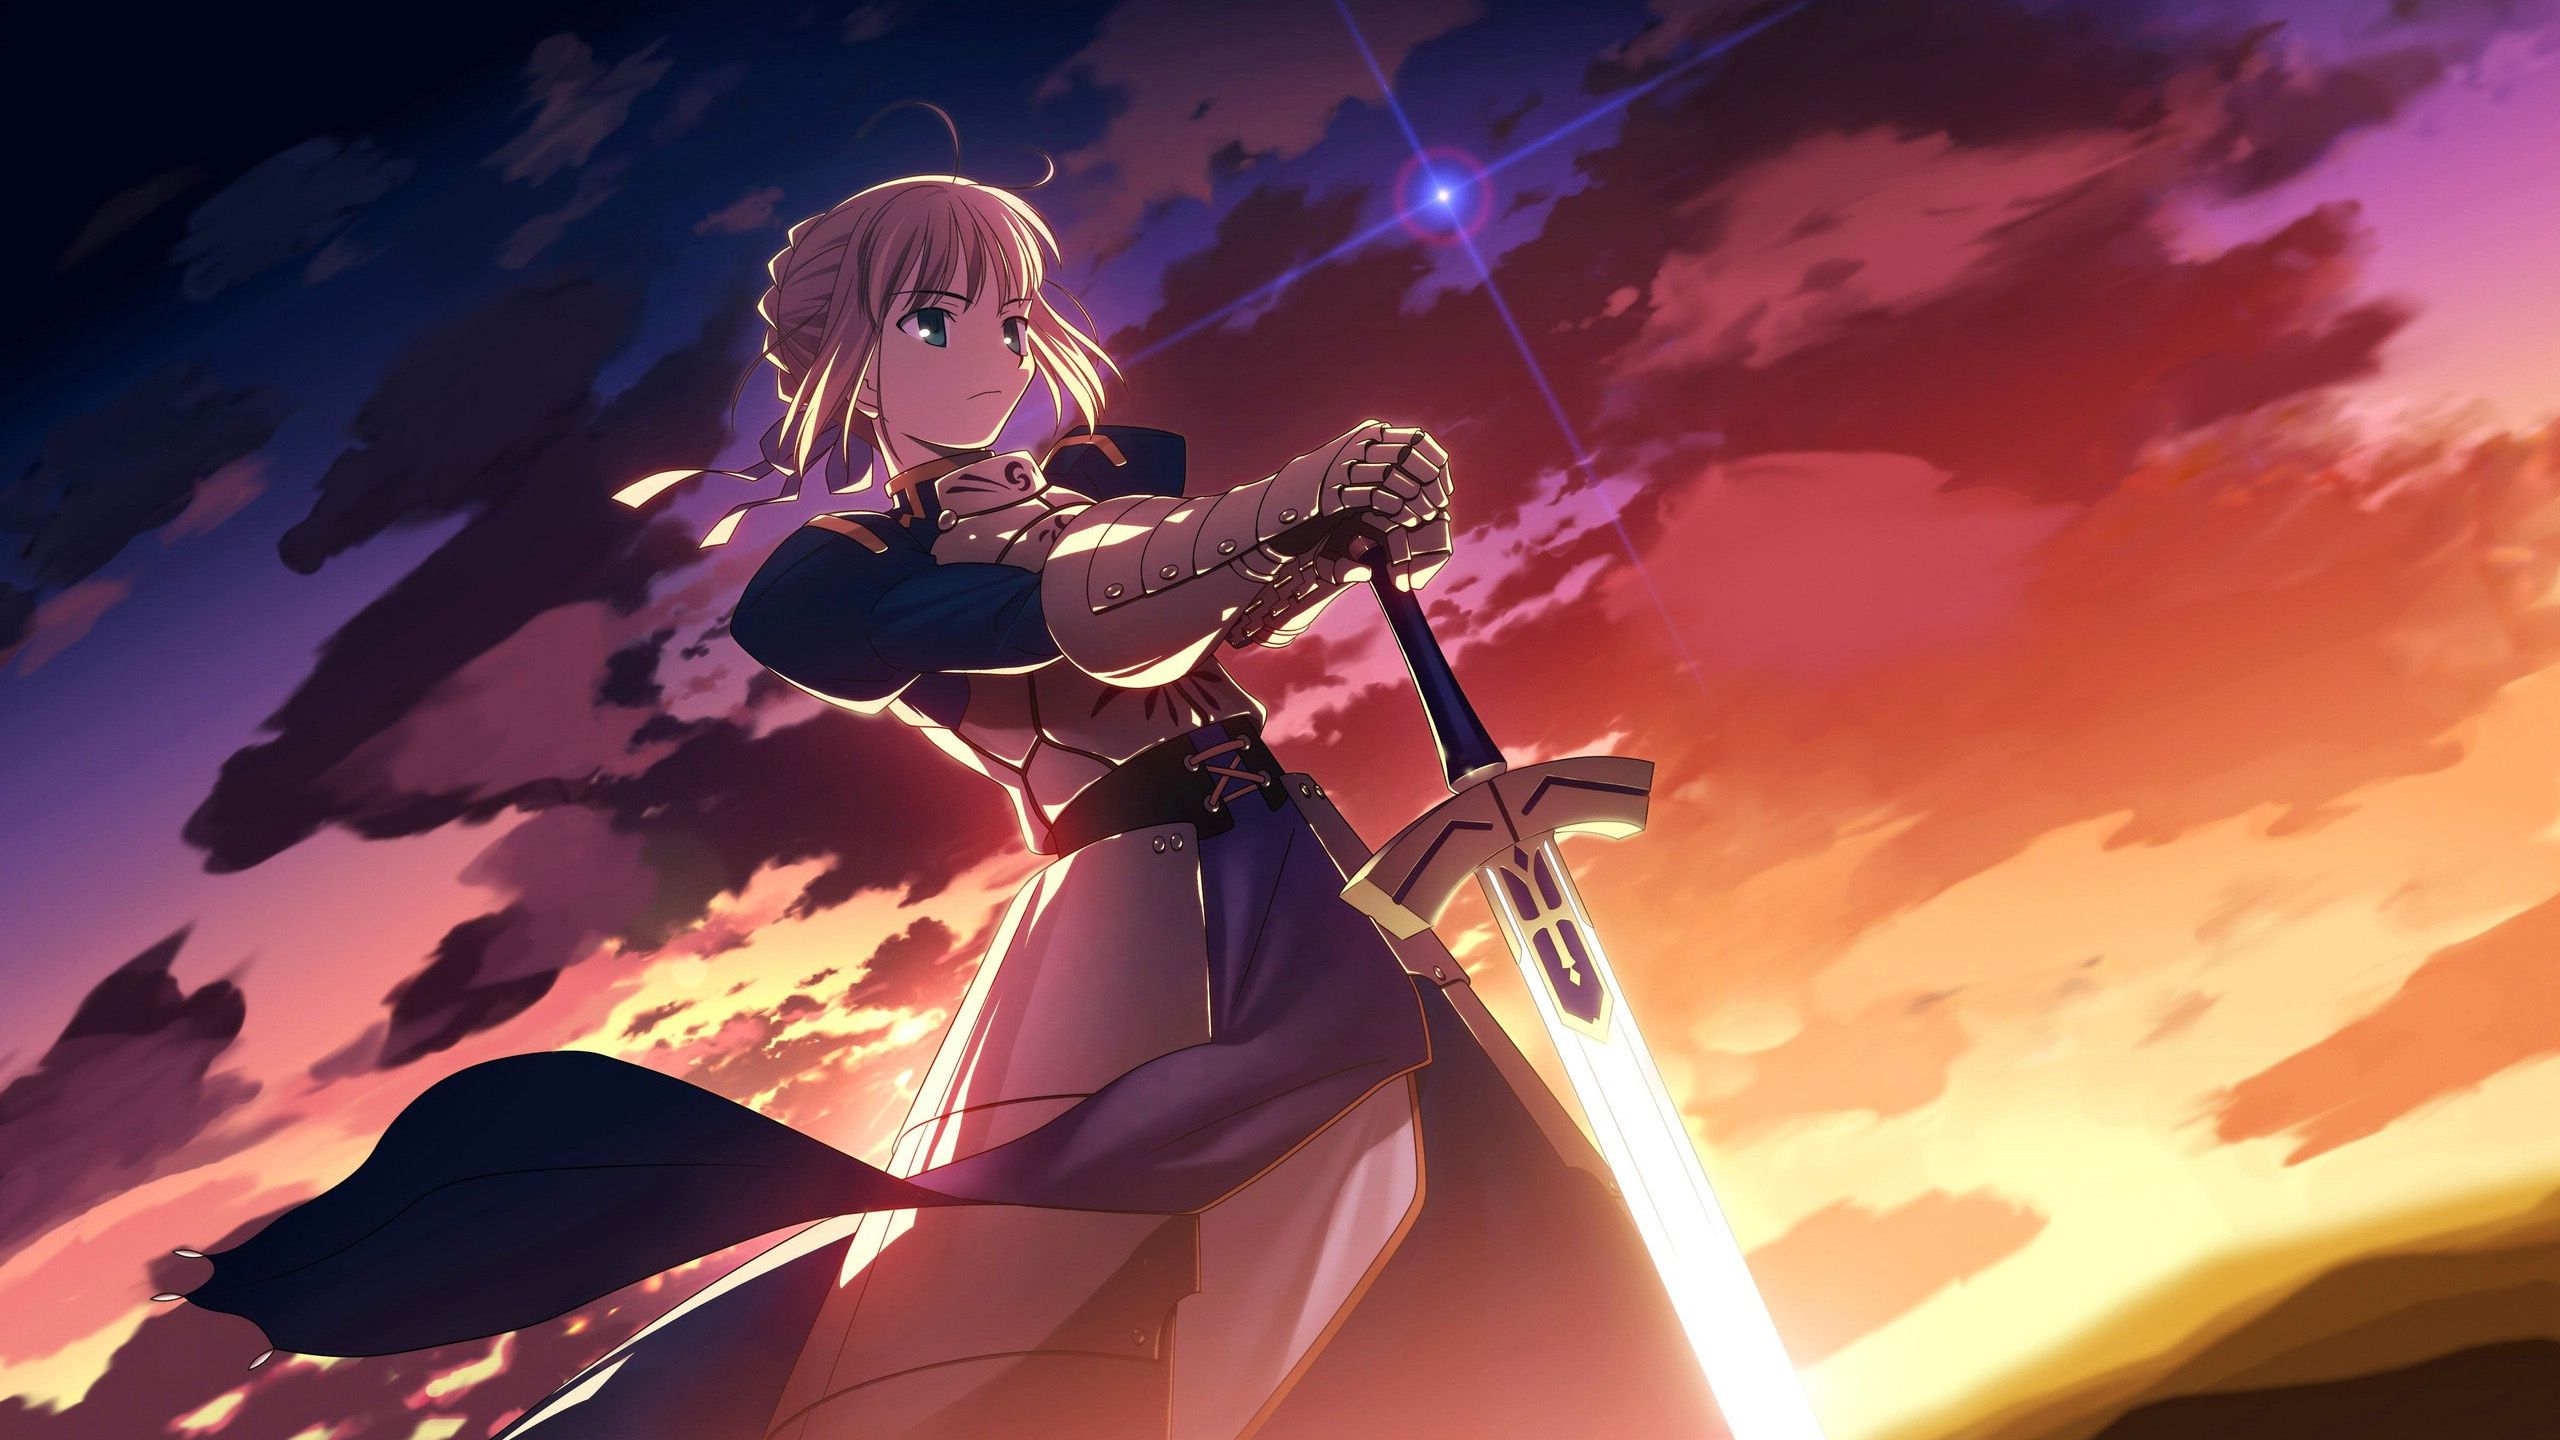 Fate Stay Night Saber Fate stay night anime Fate stay night